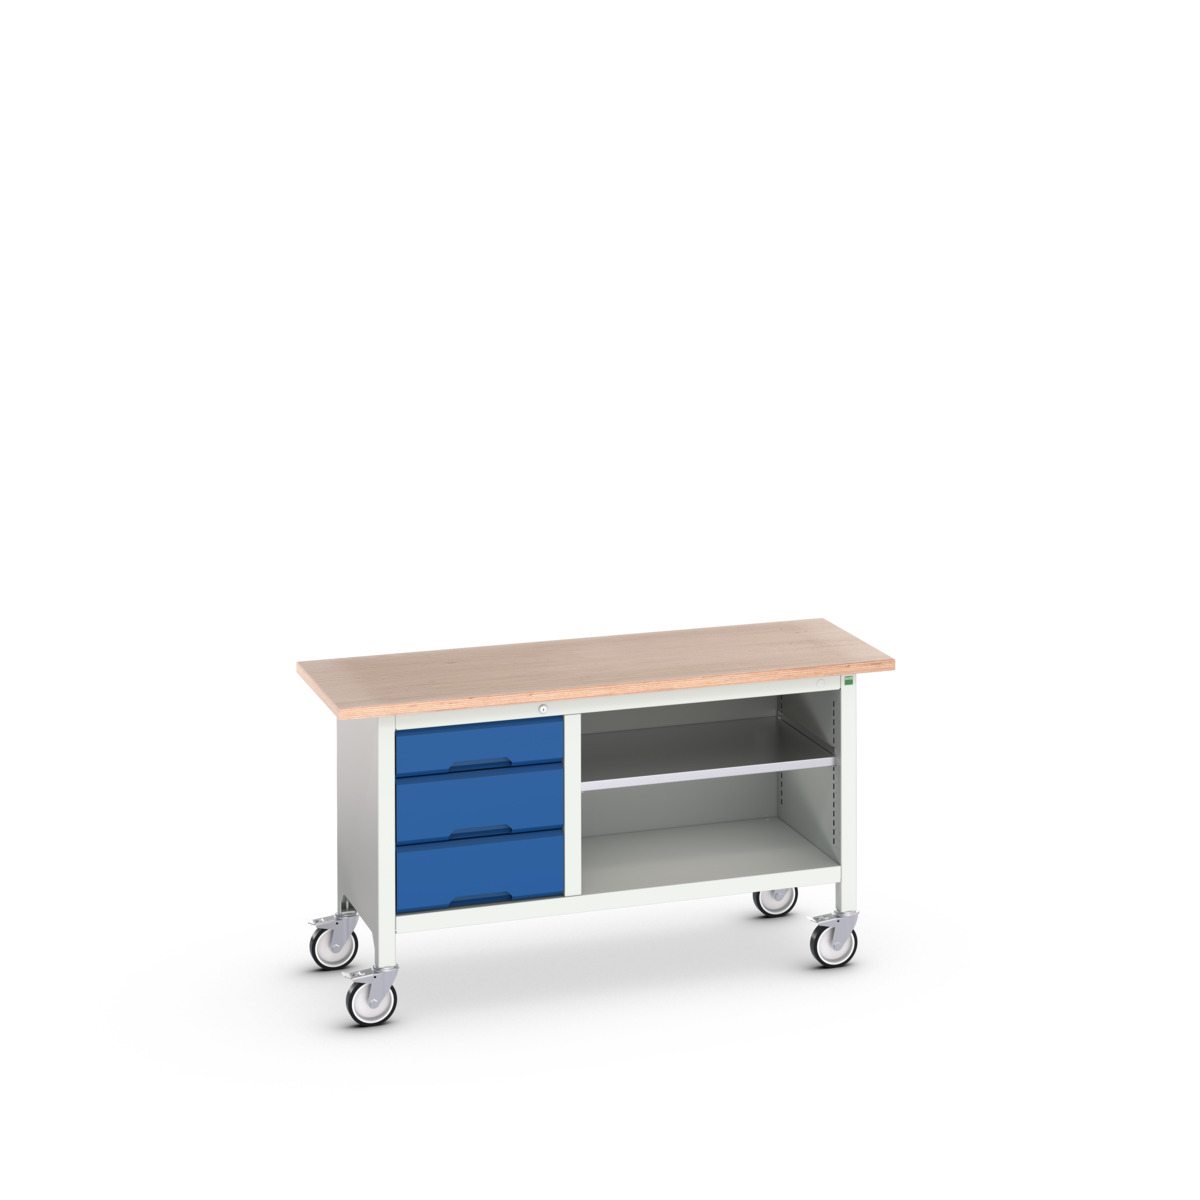 16923212.11 - verso mobile storage bench (mpx)